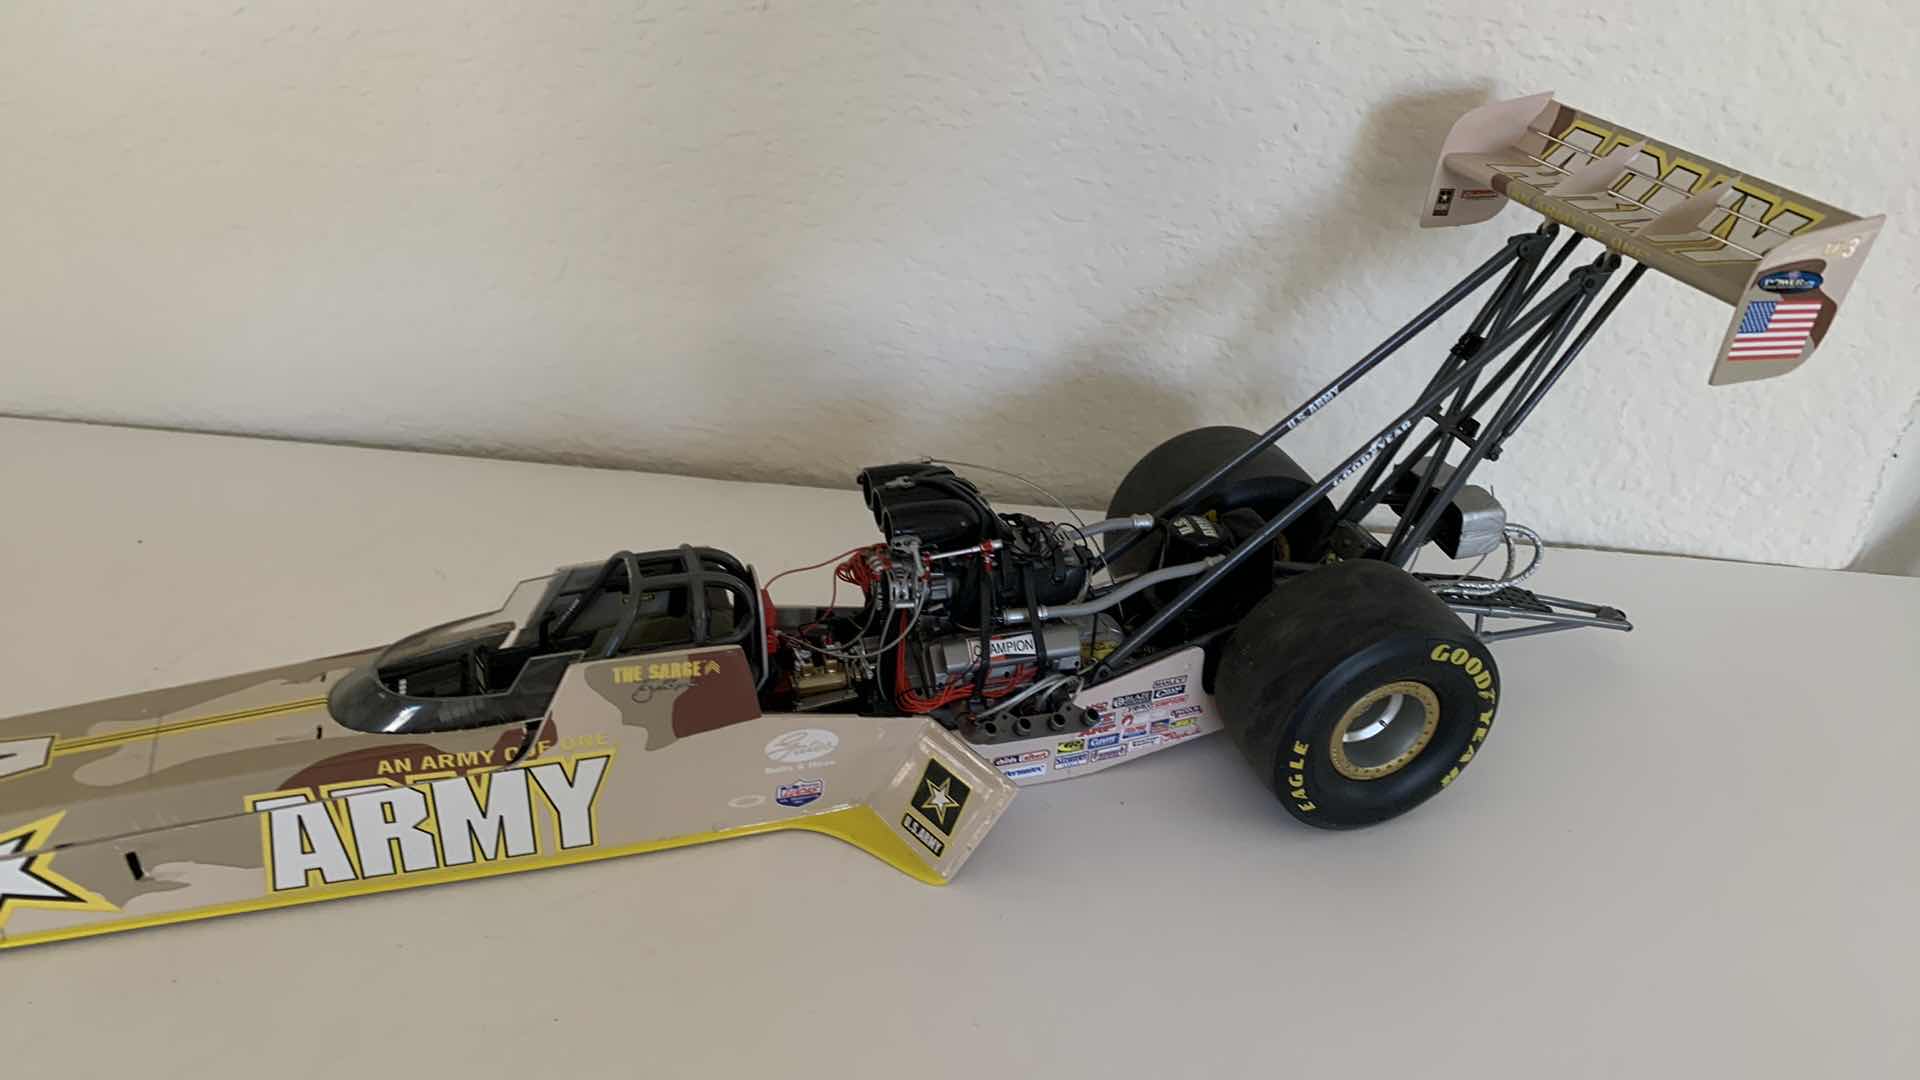 Photo 4 of ARMY TOP FUEL DIE CAST RACE CAR.